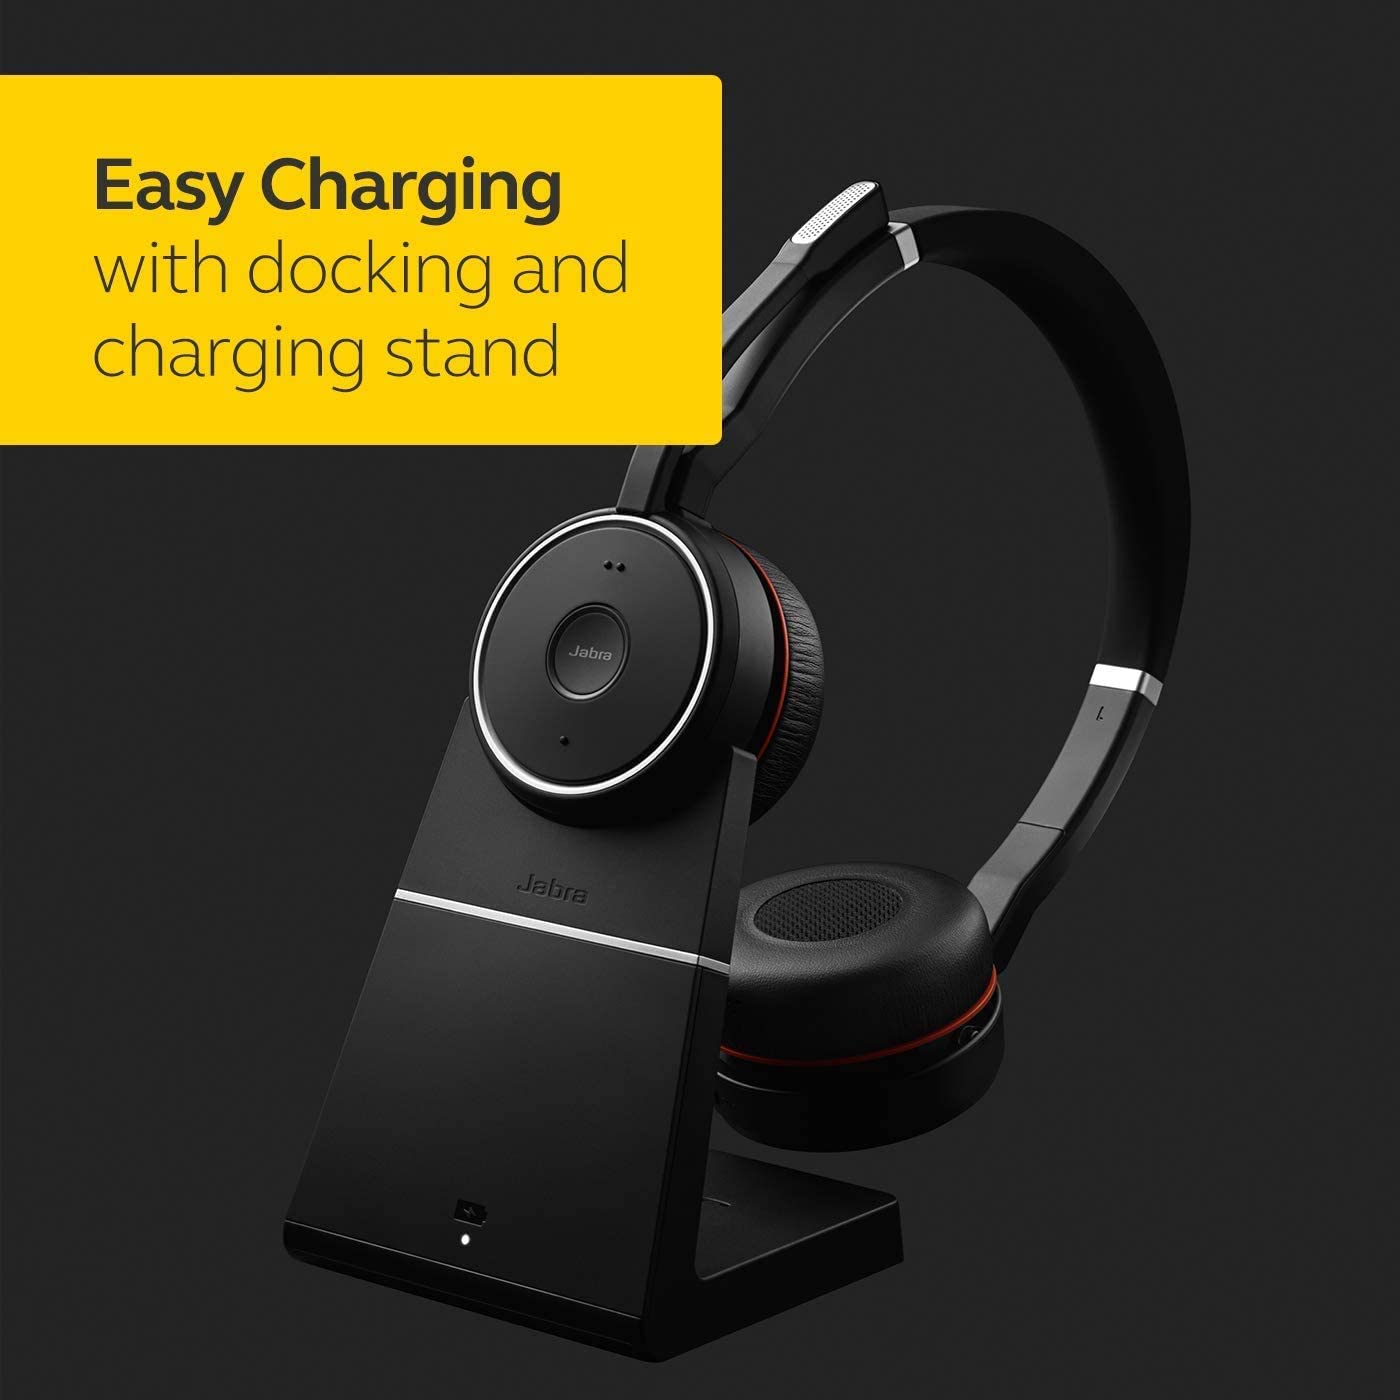 Jabra Evolve 75 - Professional Wireless Headset With Active Noise Cancellation + Link 370 USB Dongle with Charging Stand